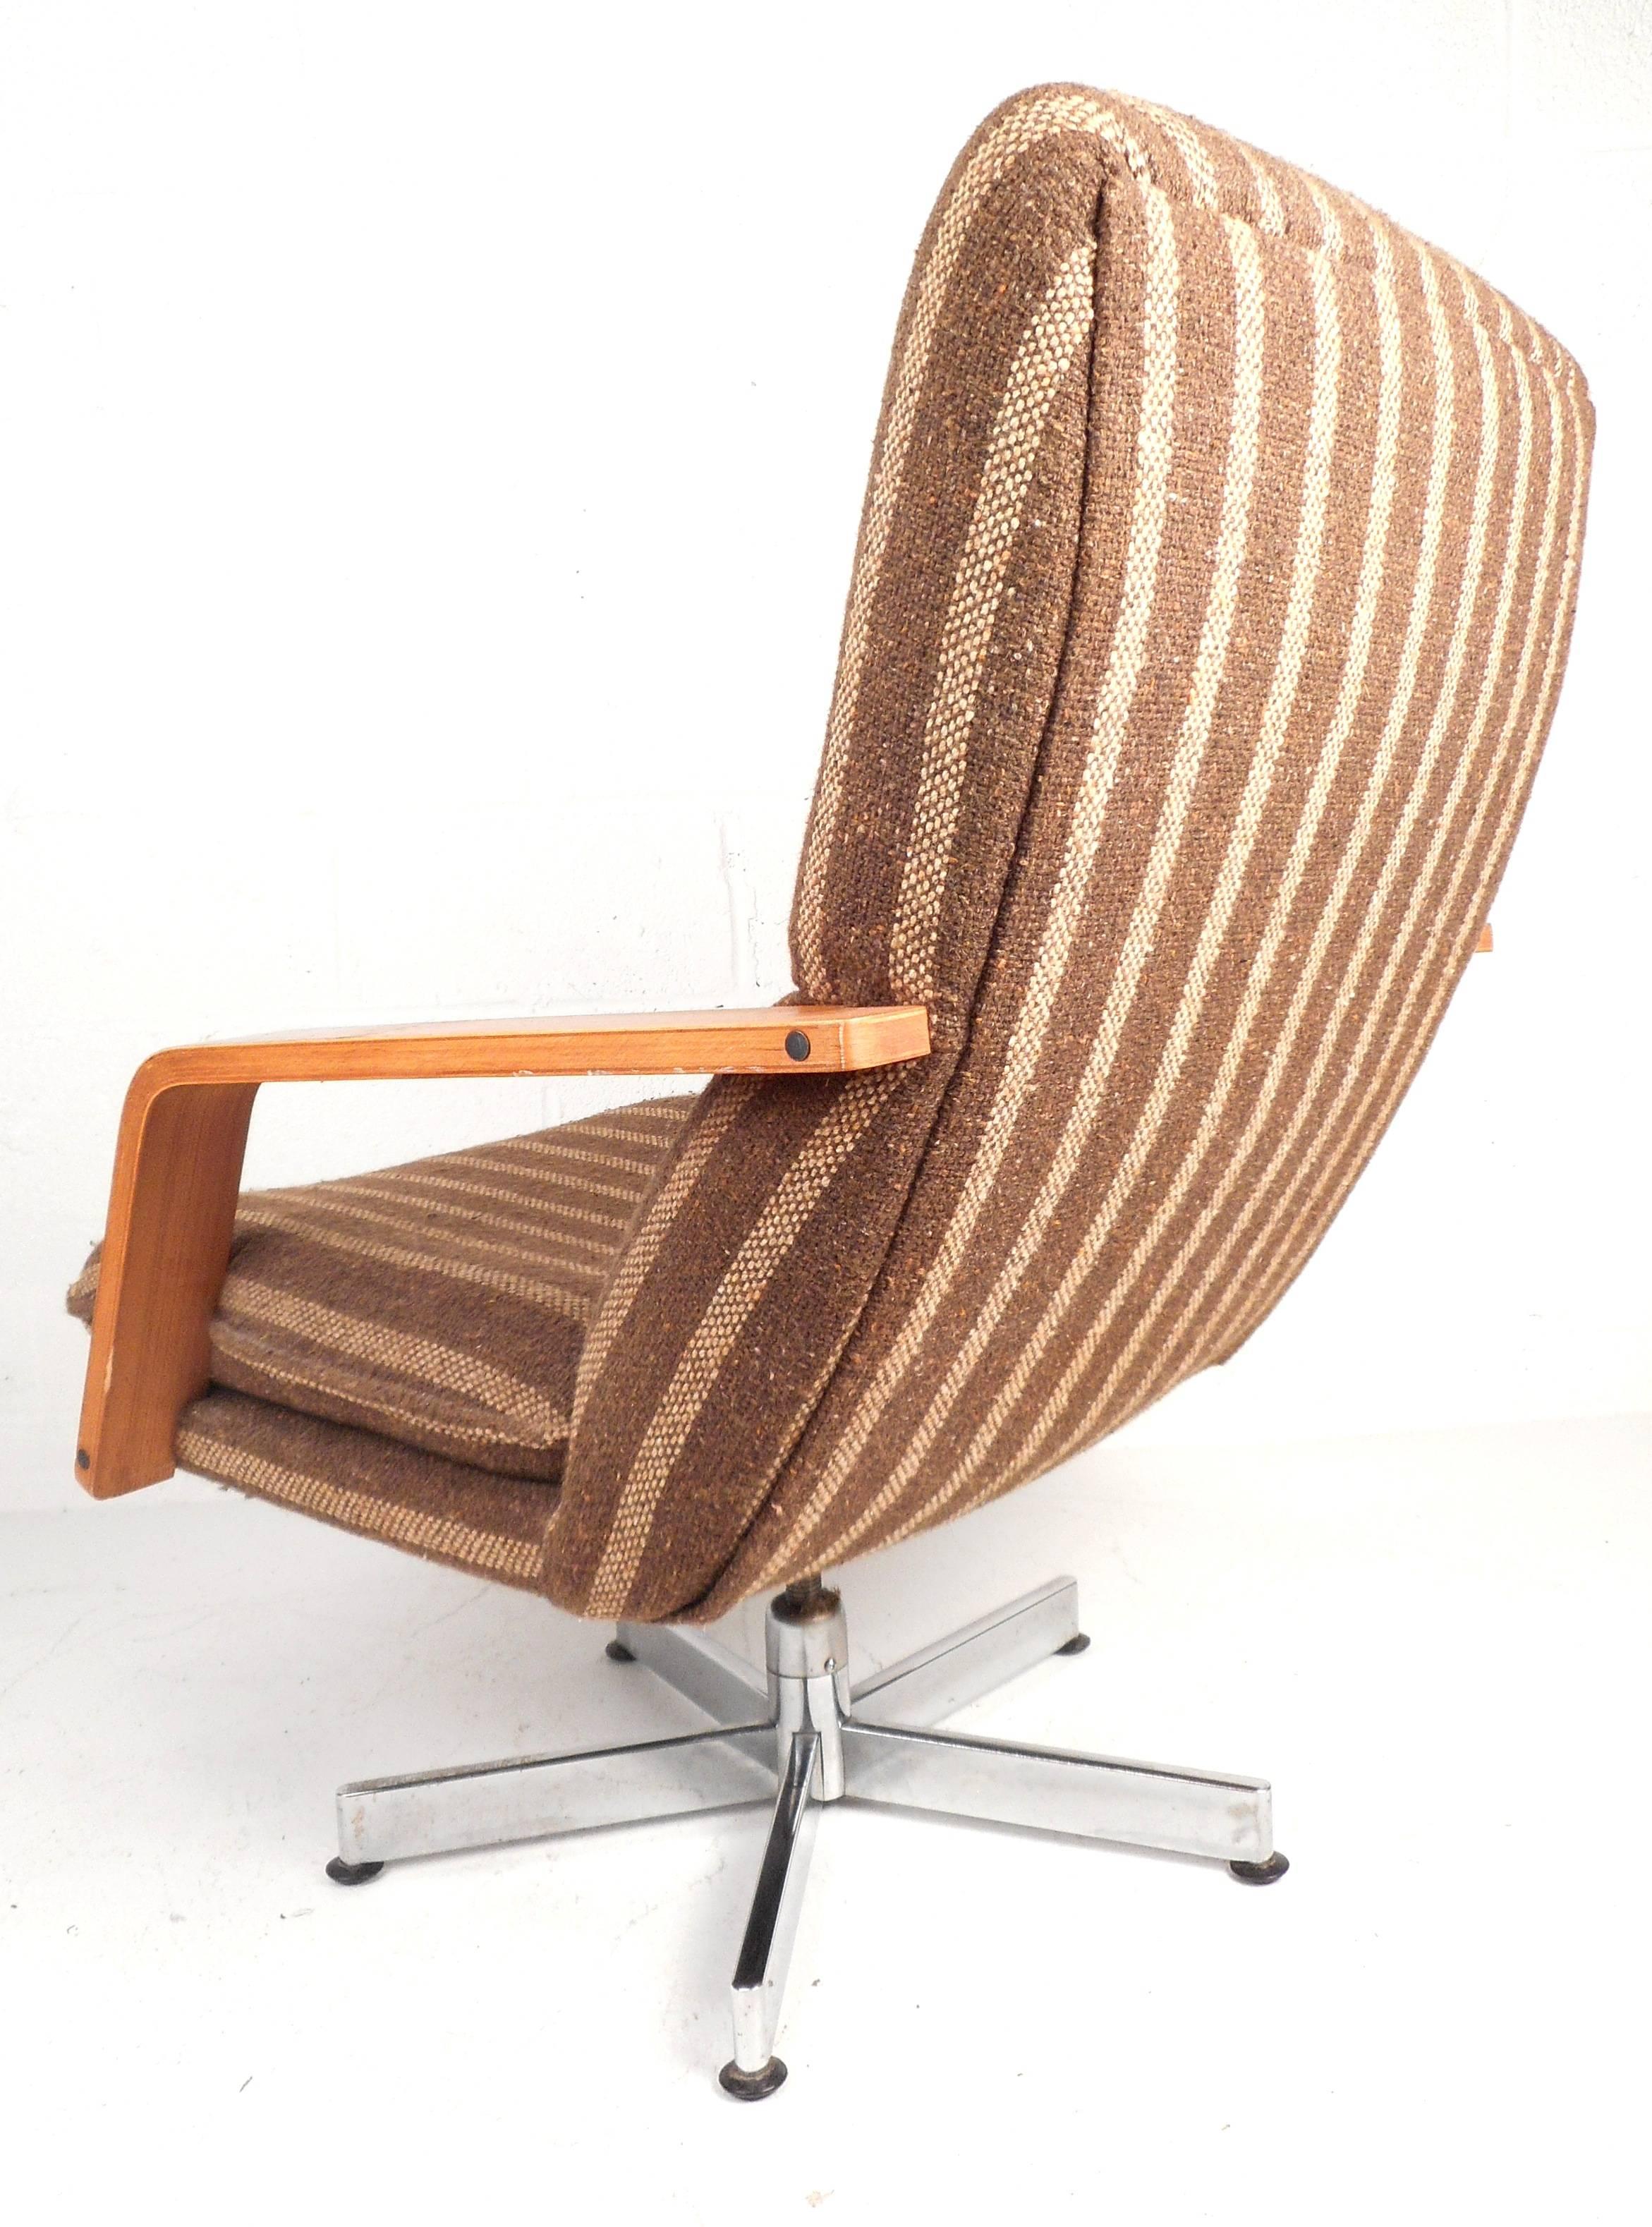 Late 20th Century Mid-Century Modern Teak and Chrome Swivel Lounge Chair with Ottoman